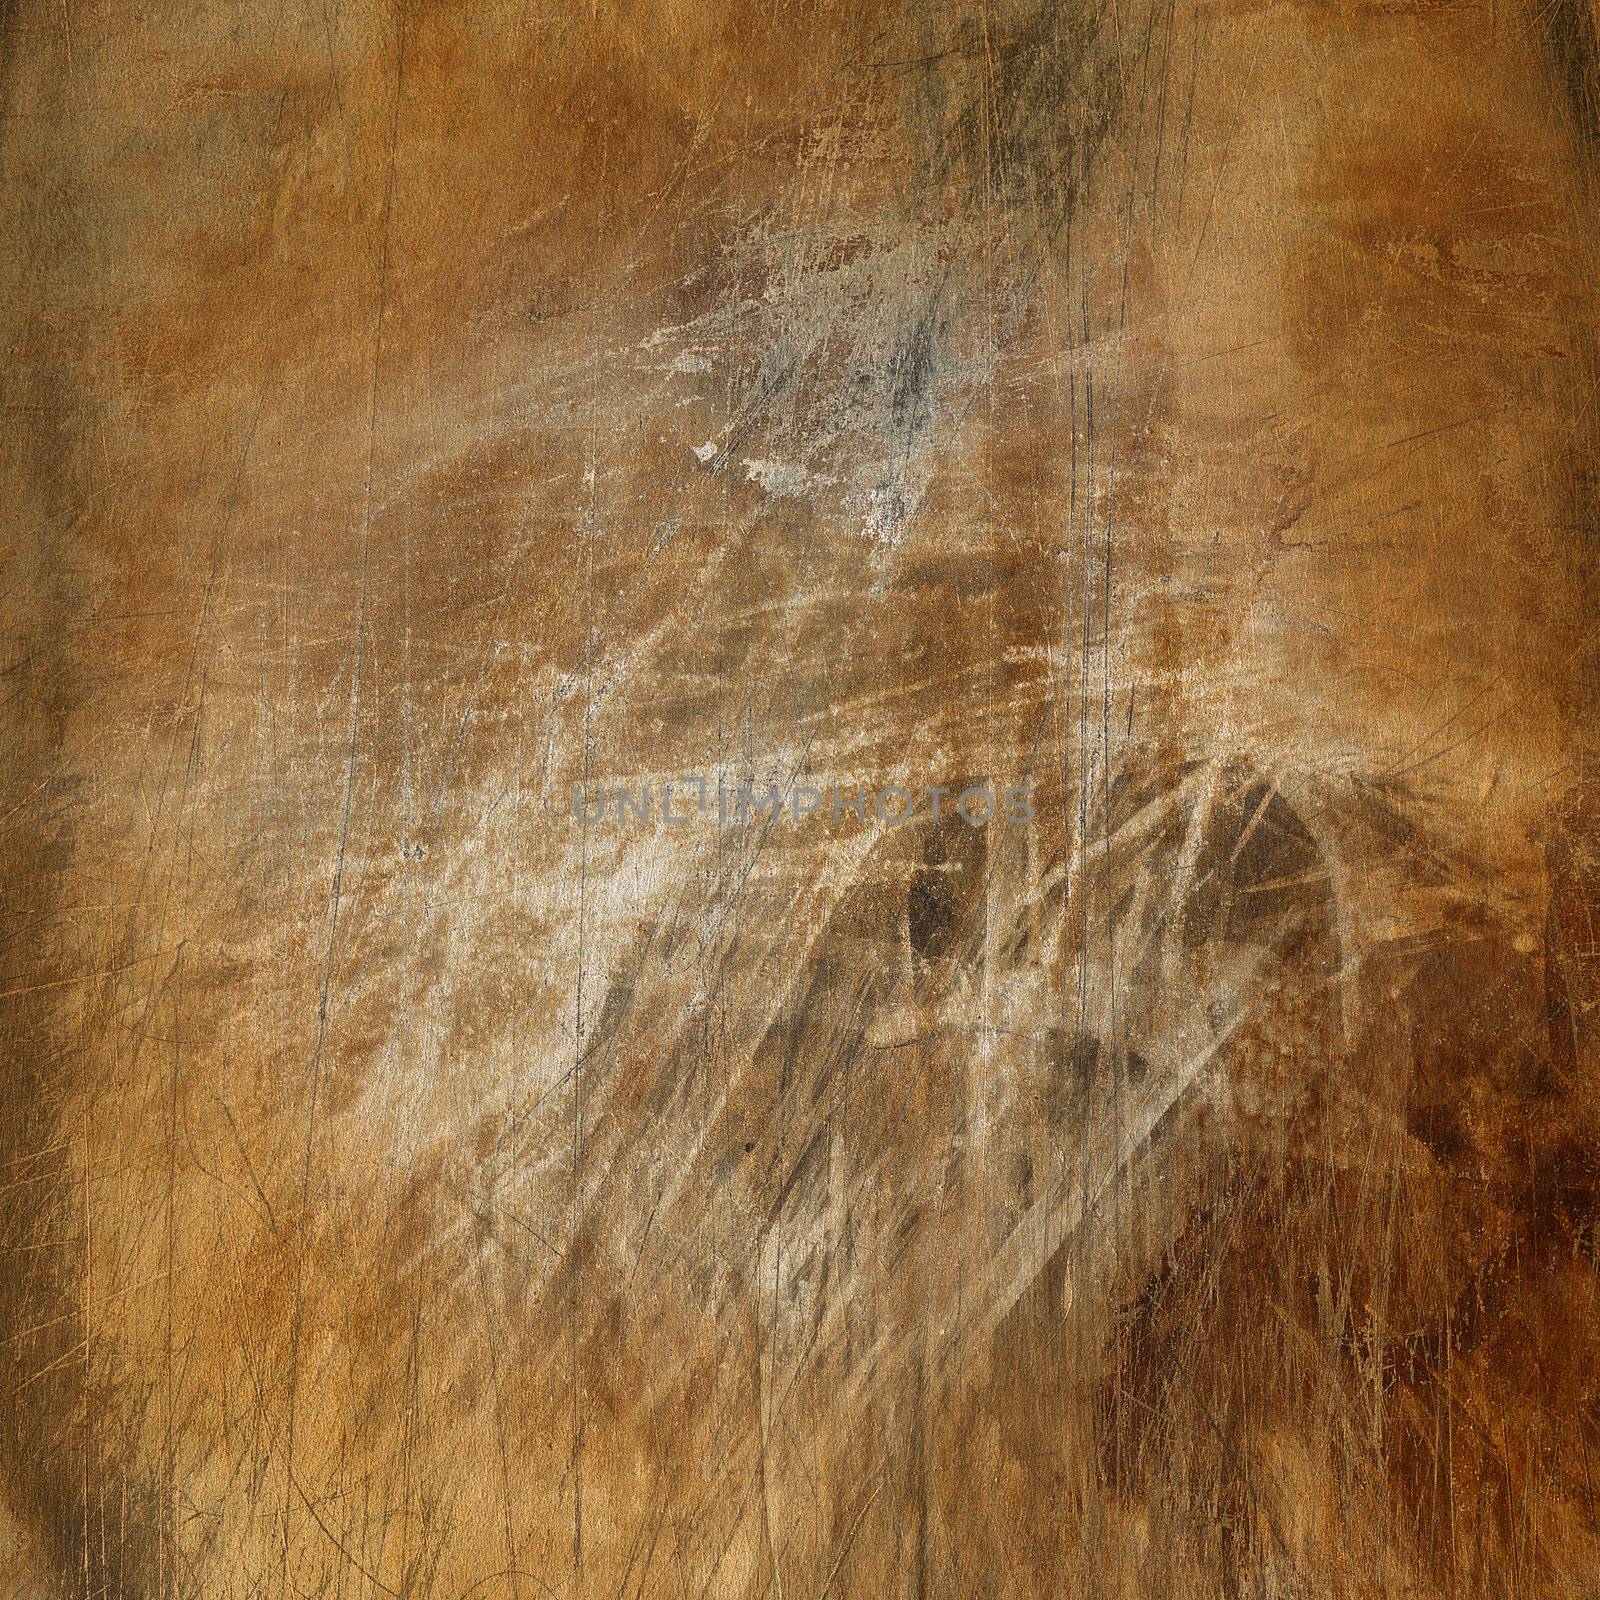 Brown grunge wall texture with space for text or image
